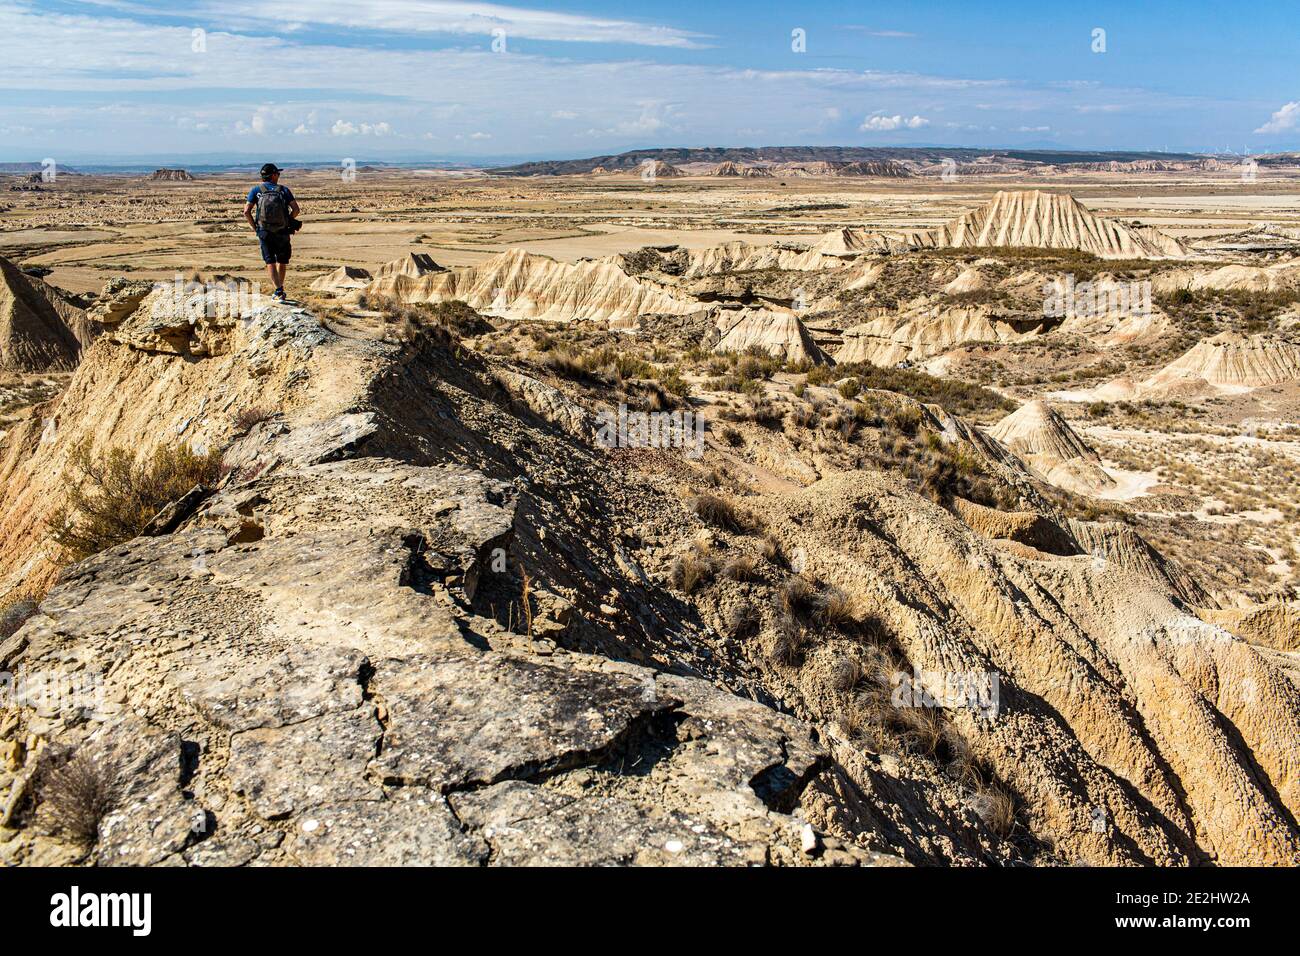 Spain: landscape, semi-desert natural region of the Bardenas Reales, Navarre. Man looking at the landscape marked by erosion. Stock Photo